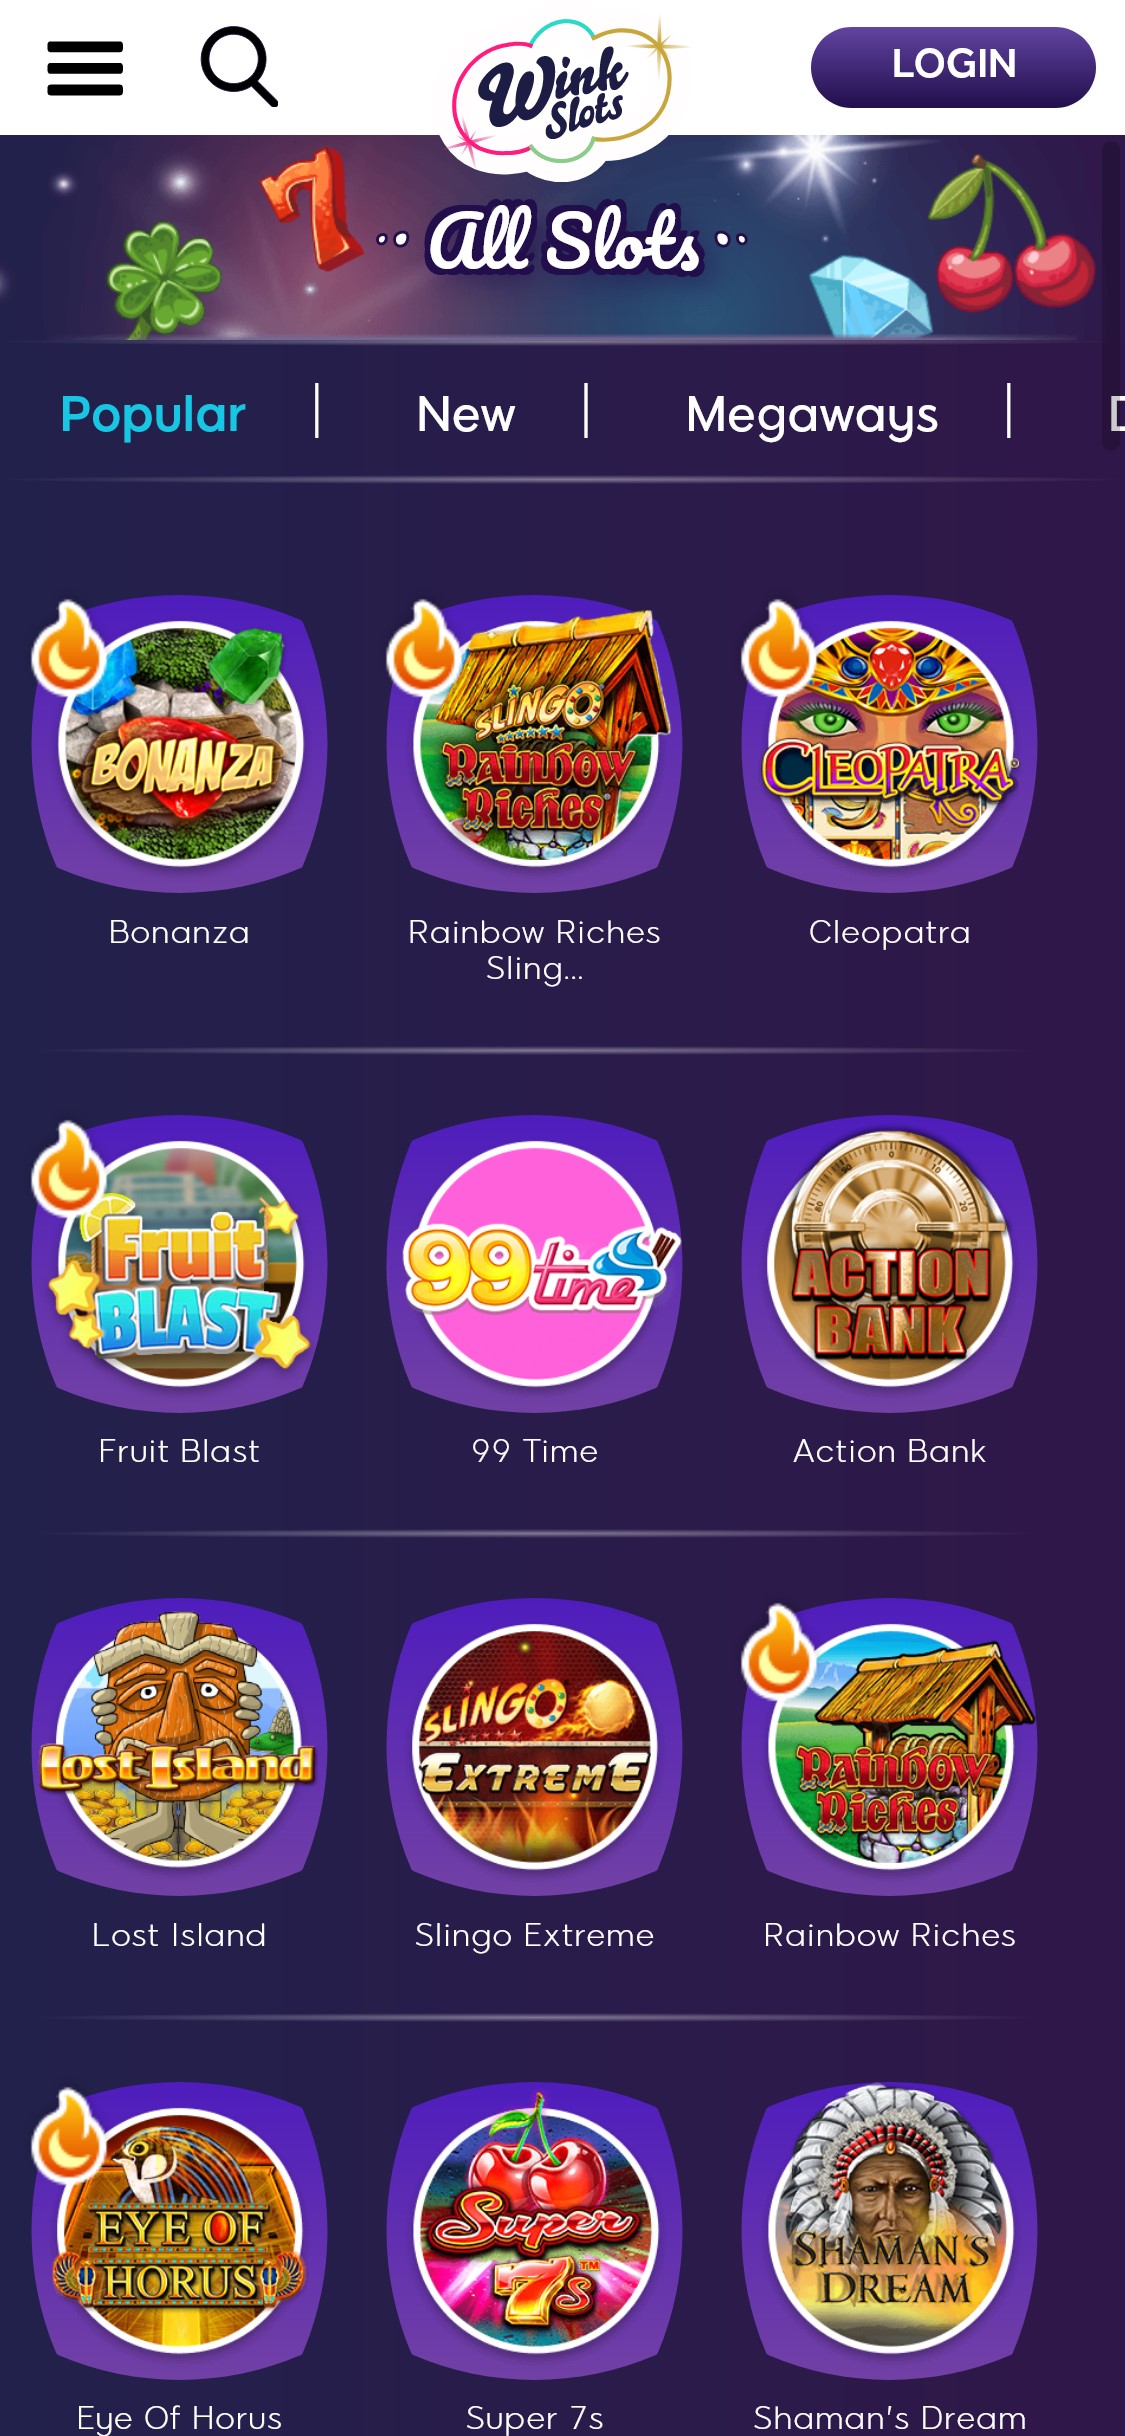 Wink Slots Casino Mobile Games Review